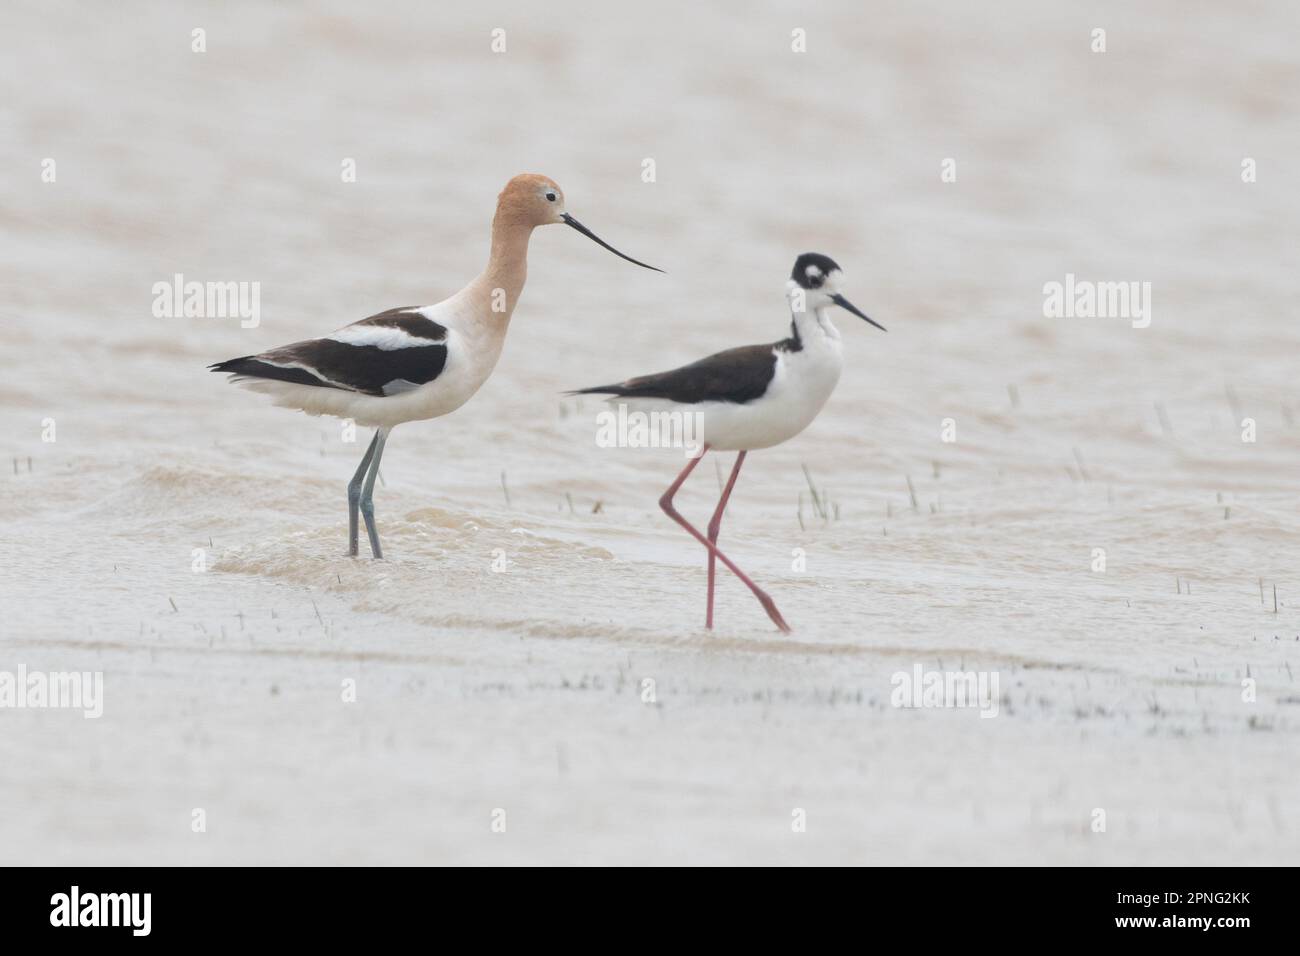 American avocet, Recurvirostra americana, together with a black necked stilt, Himantopus mexicanus, in a vernal pool in California. Stock Photo